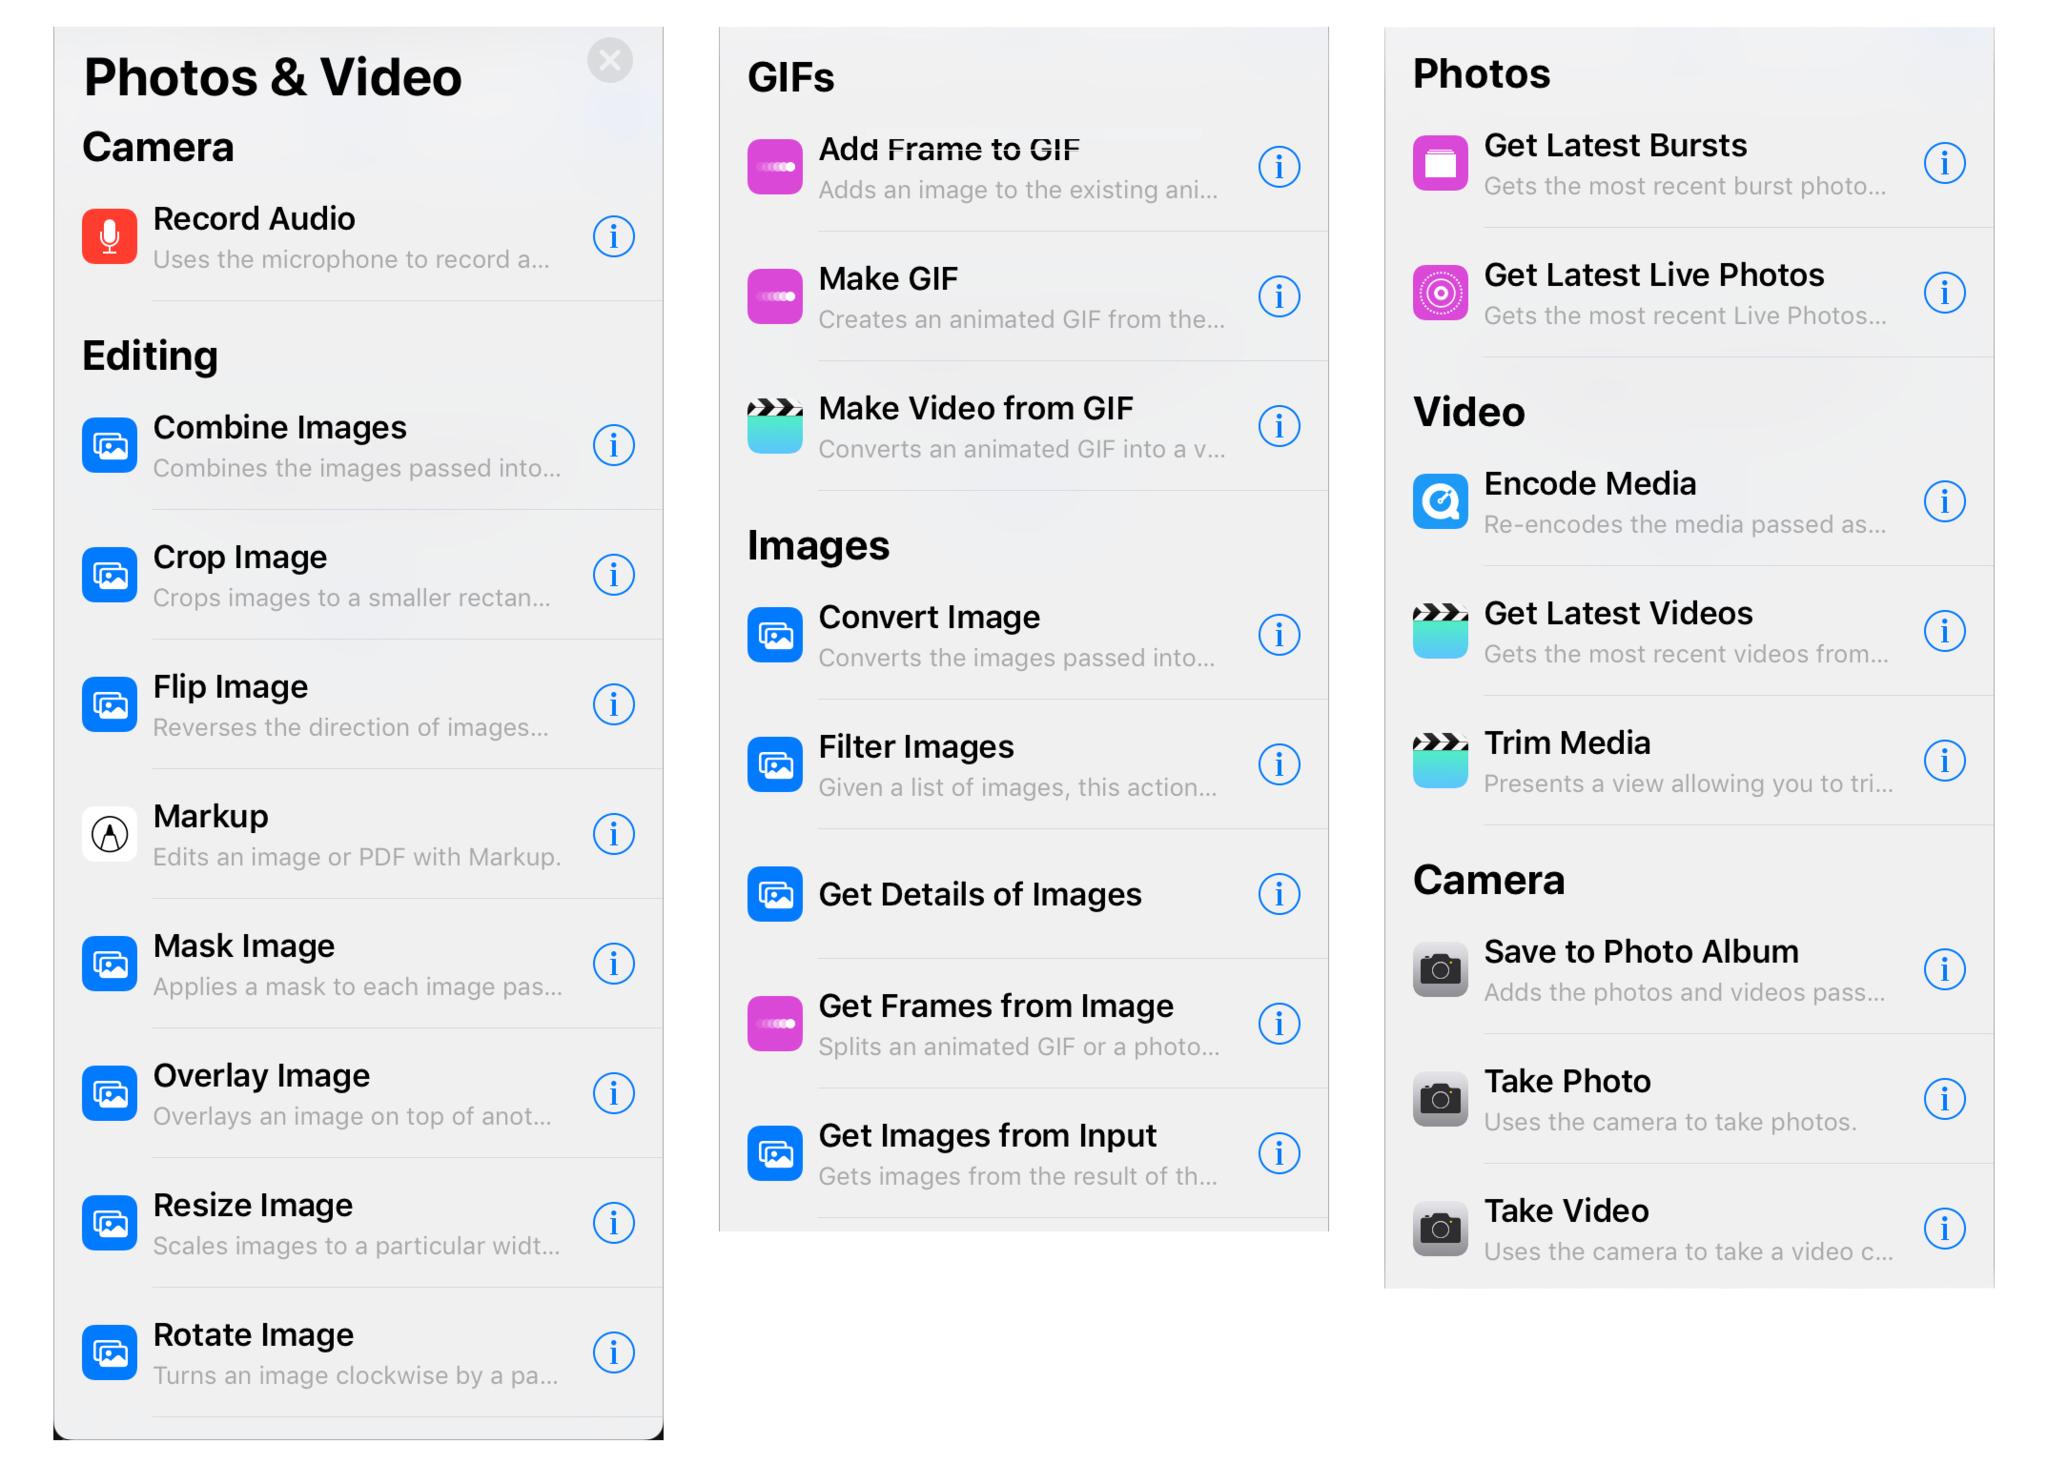 Image showing clipped screenshots of Shortcuts actions, including the Camera, Editing, GIFs, Images, Photos, Video and Camera categories